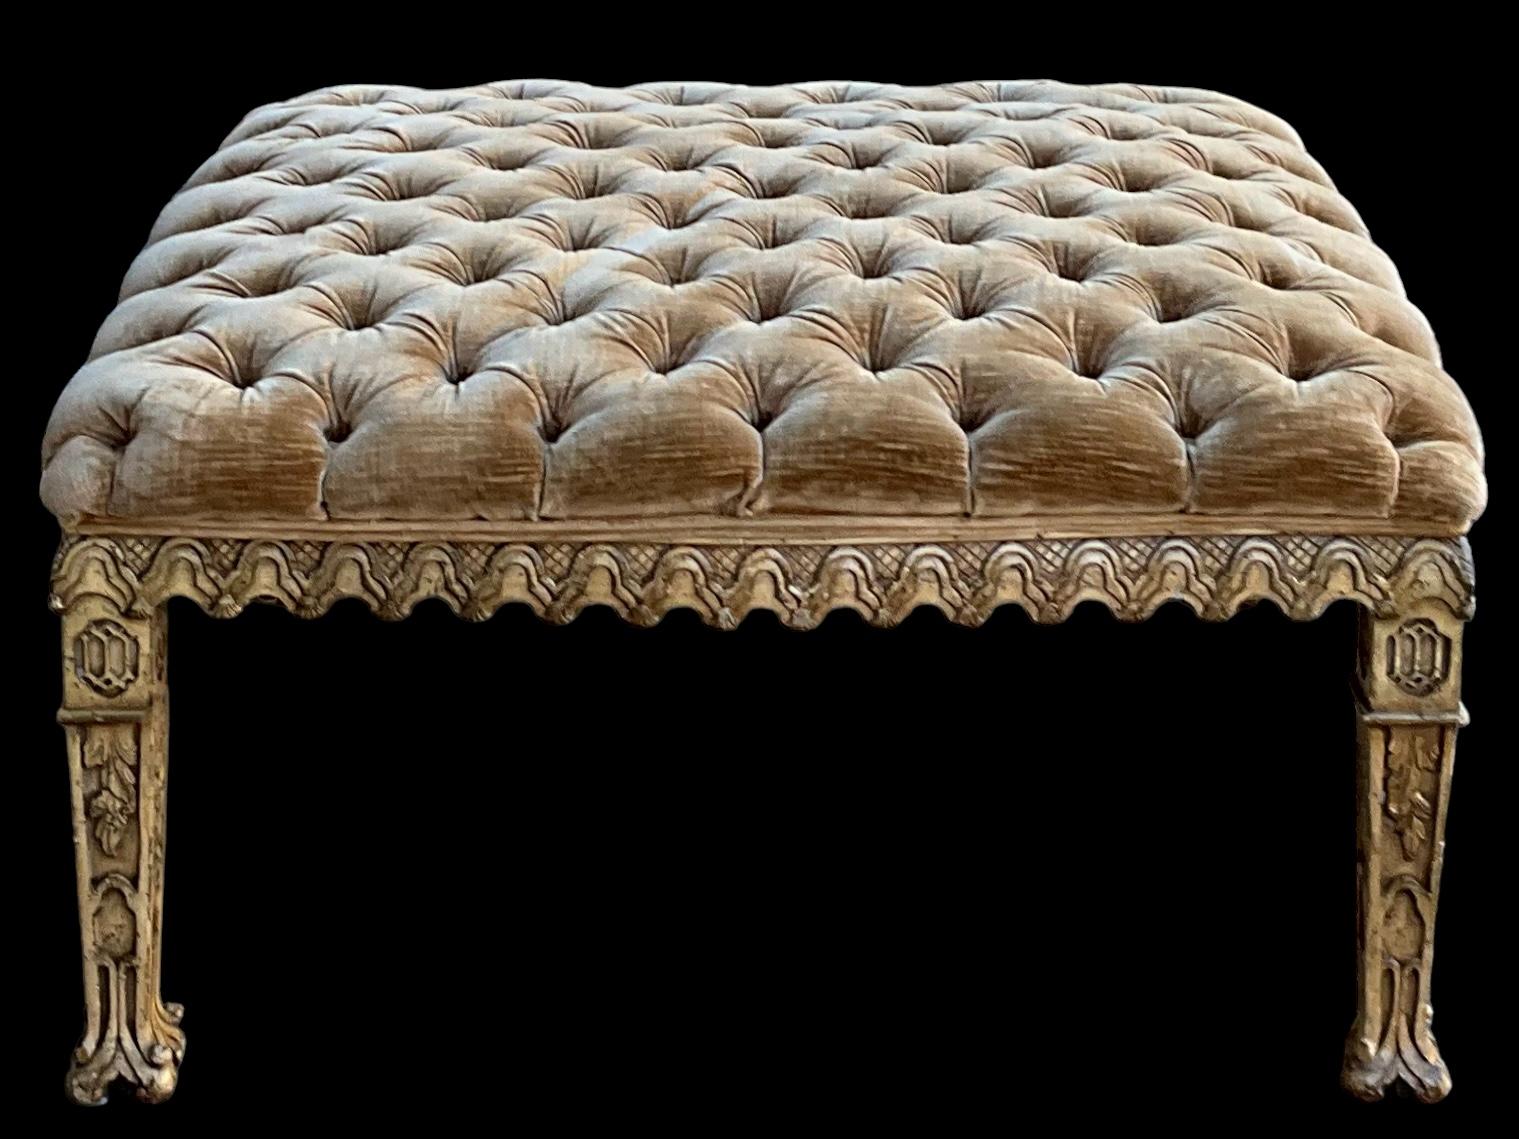 1970s Venetian Style Heavily Carved Tufted Velvet Ottoman / Coffee Table In Good Condition For Sale In Kennesaw, GA